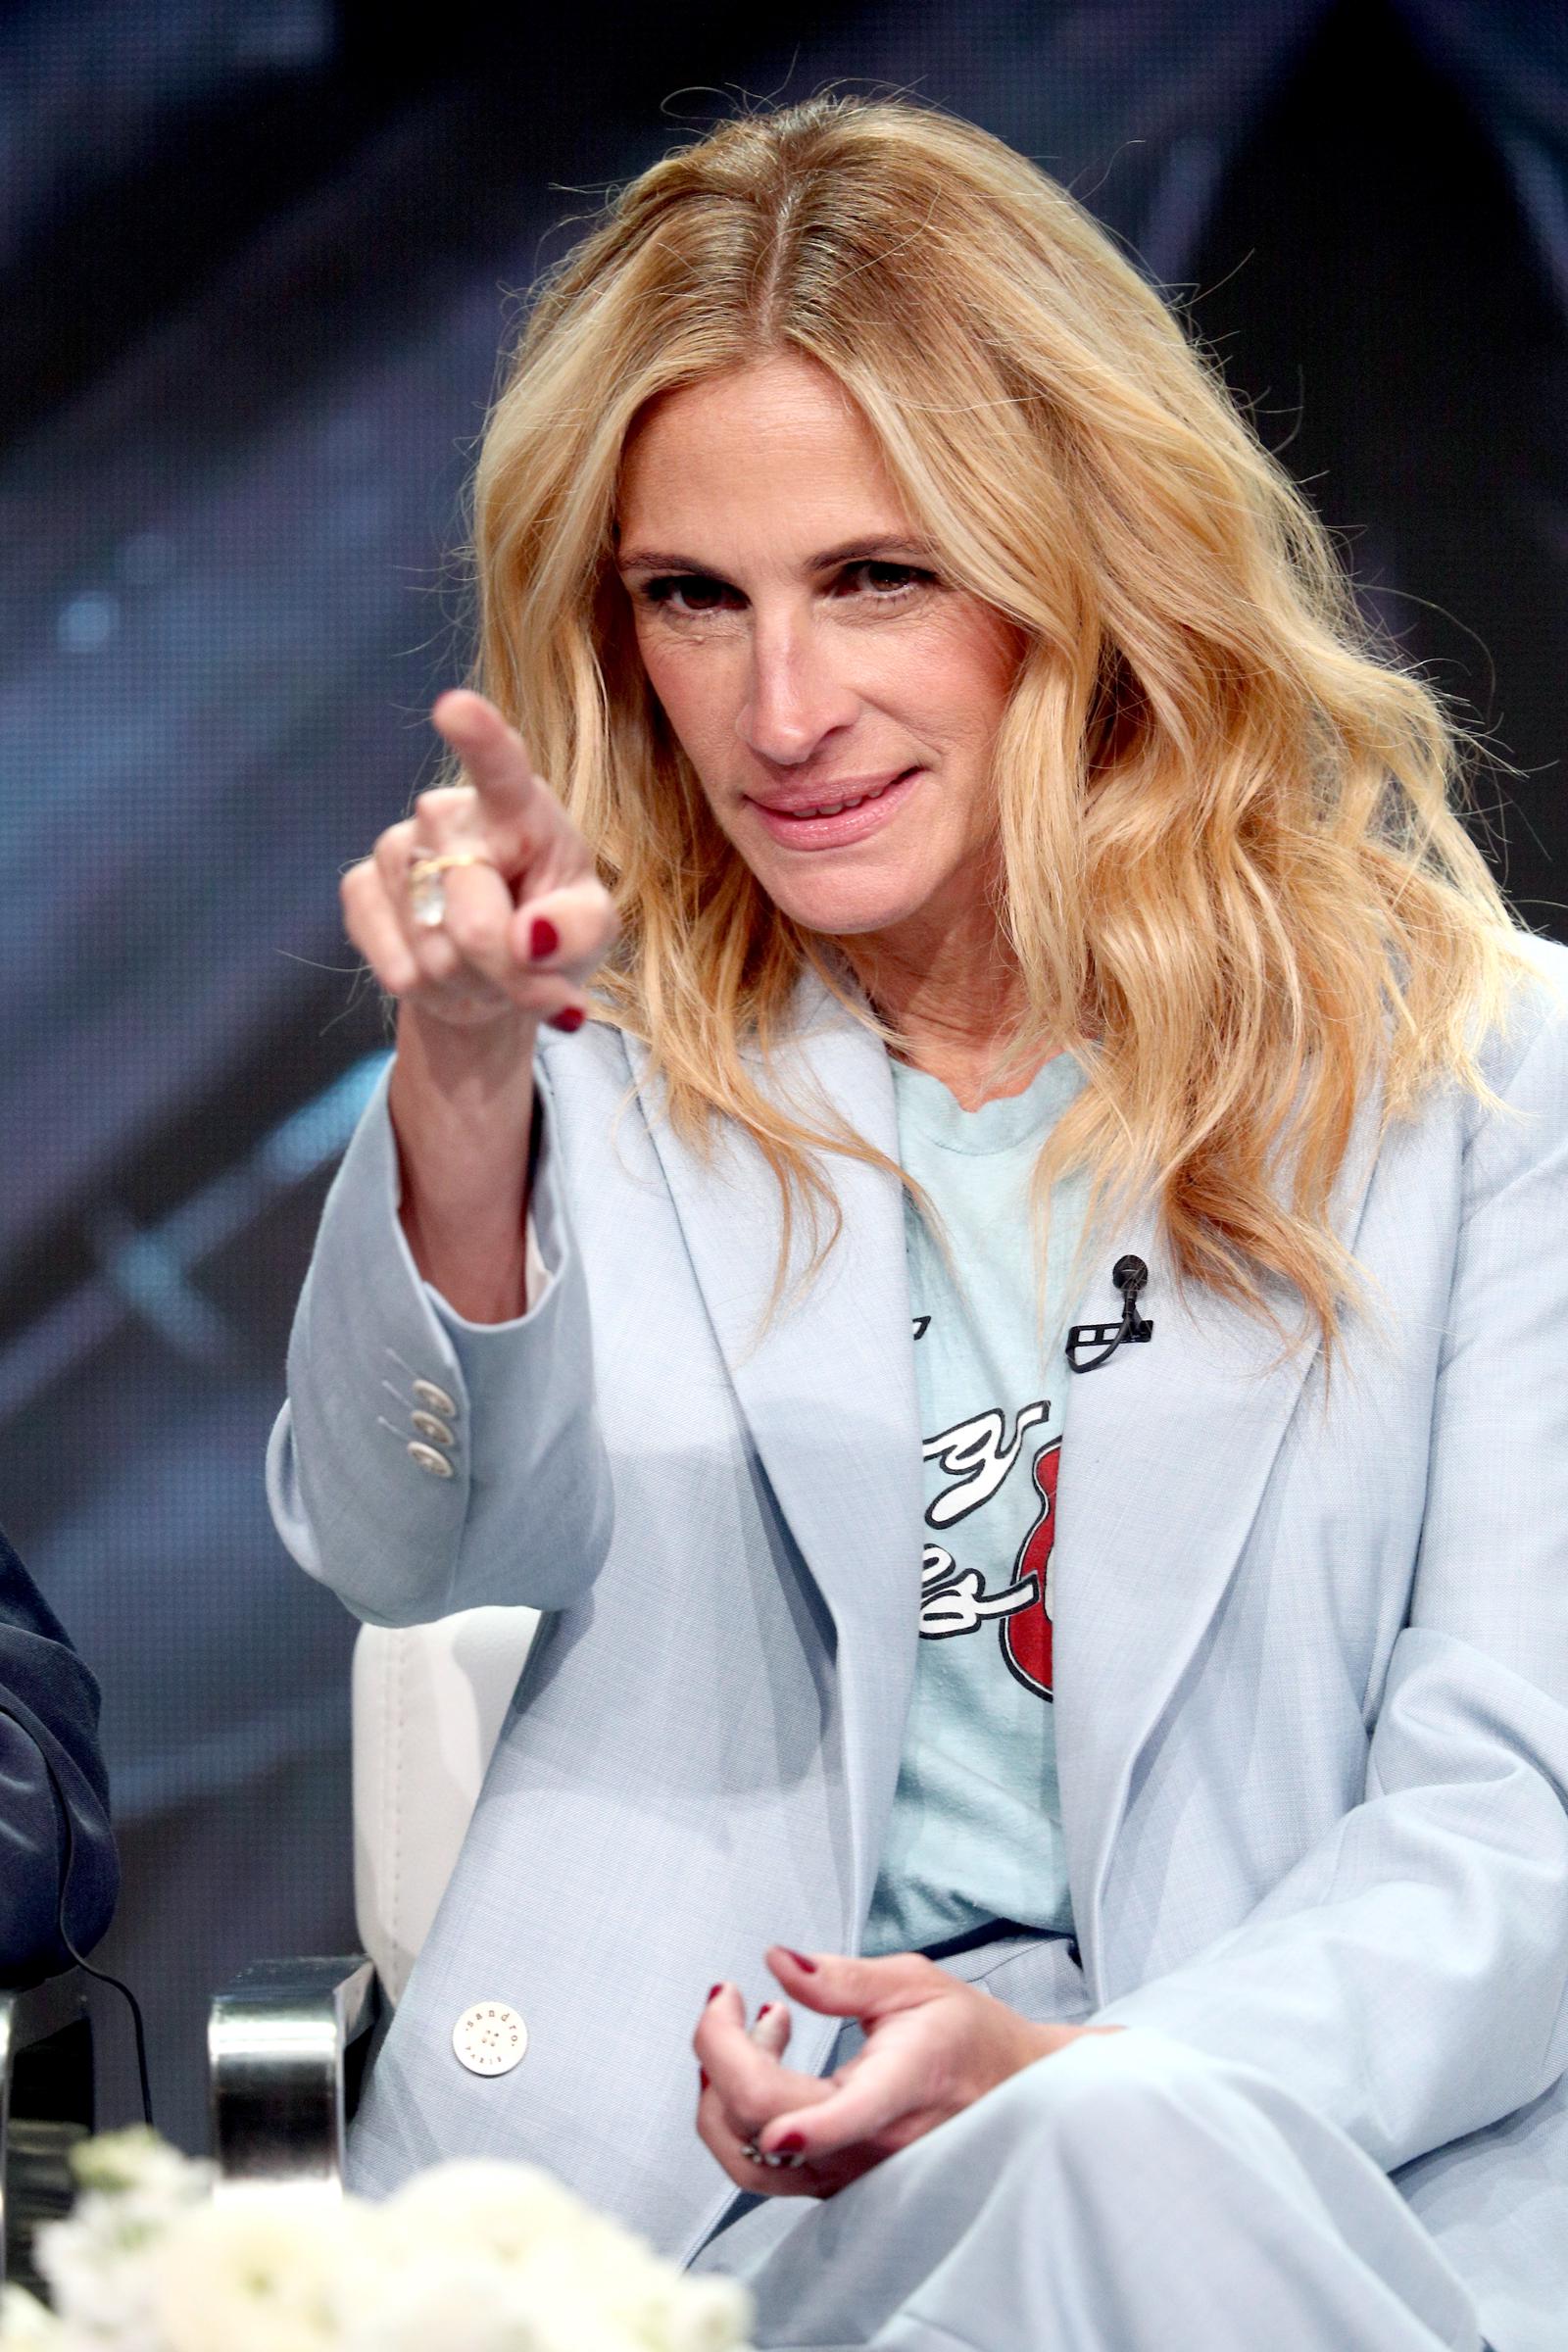 Julia Roberts speaks onstage at the Summer 2018 TCA Press Tour in Beverly Hills, California on July 28, 2018. | Source: Getty Images